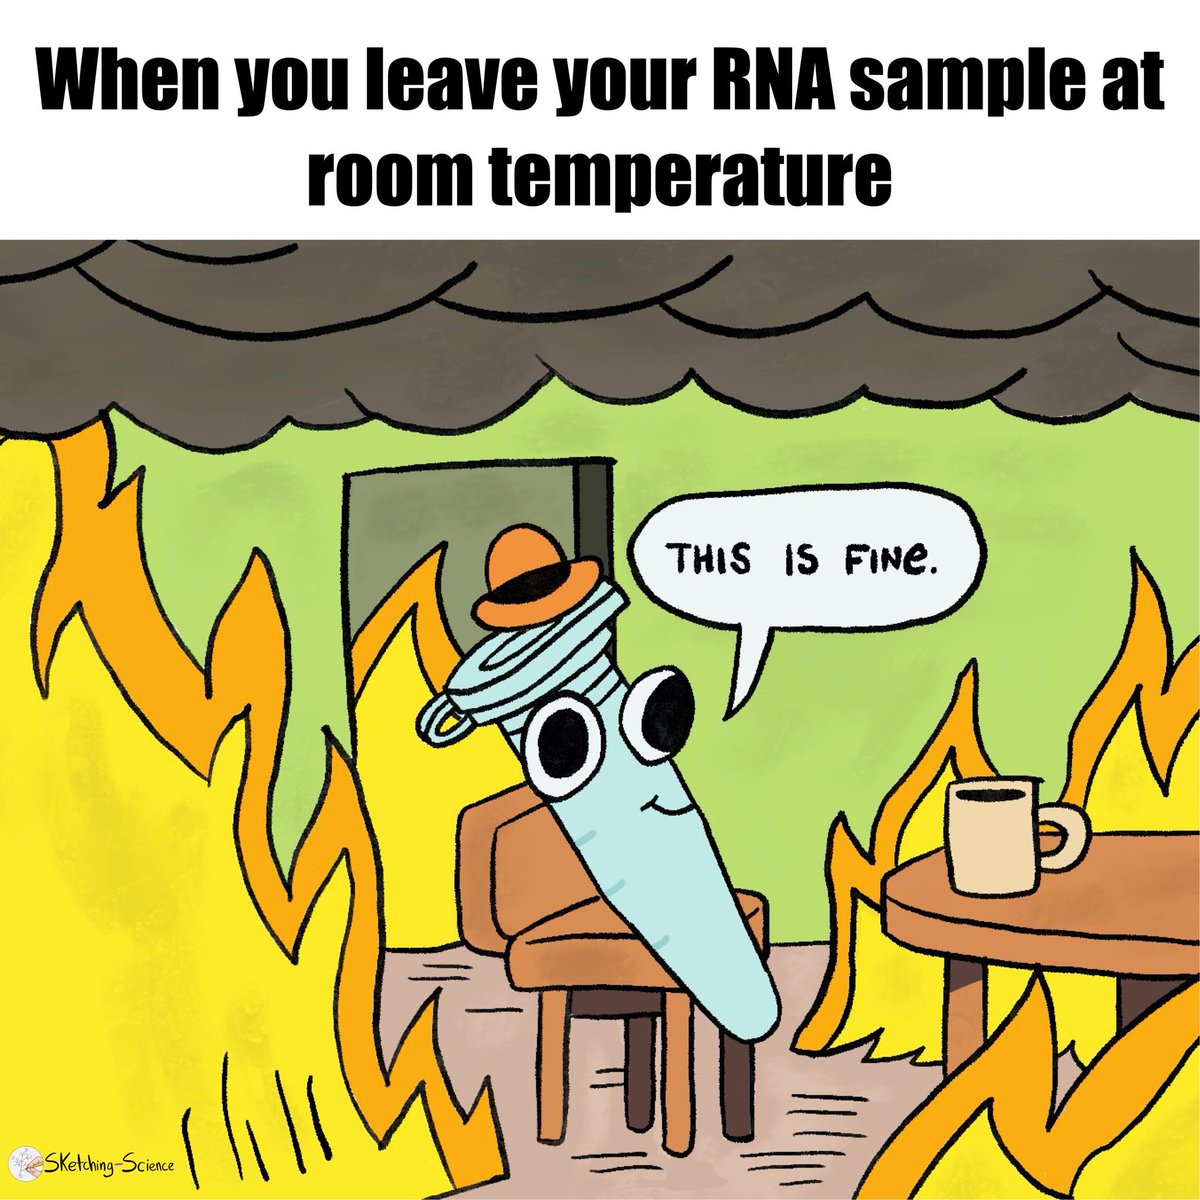 Your RNA sample watching you like 😓😰

Image by Sketching Science

#RNA #biology #biotechnology #molecularbiology #bioengineering #scientificresearch #phdlife #research #lablife #labmemes